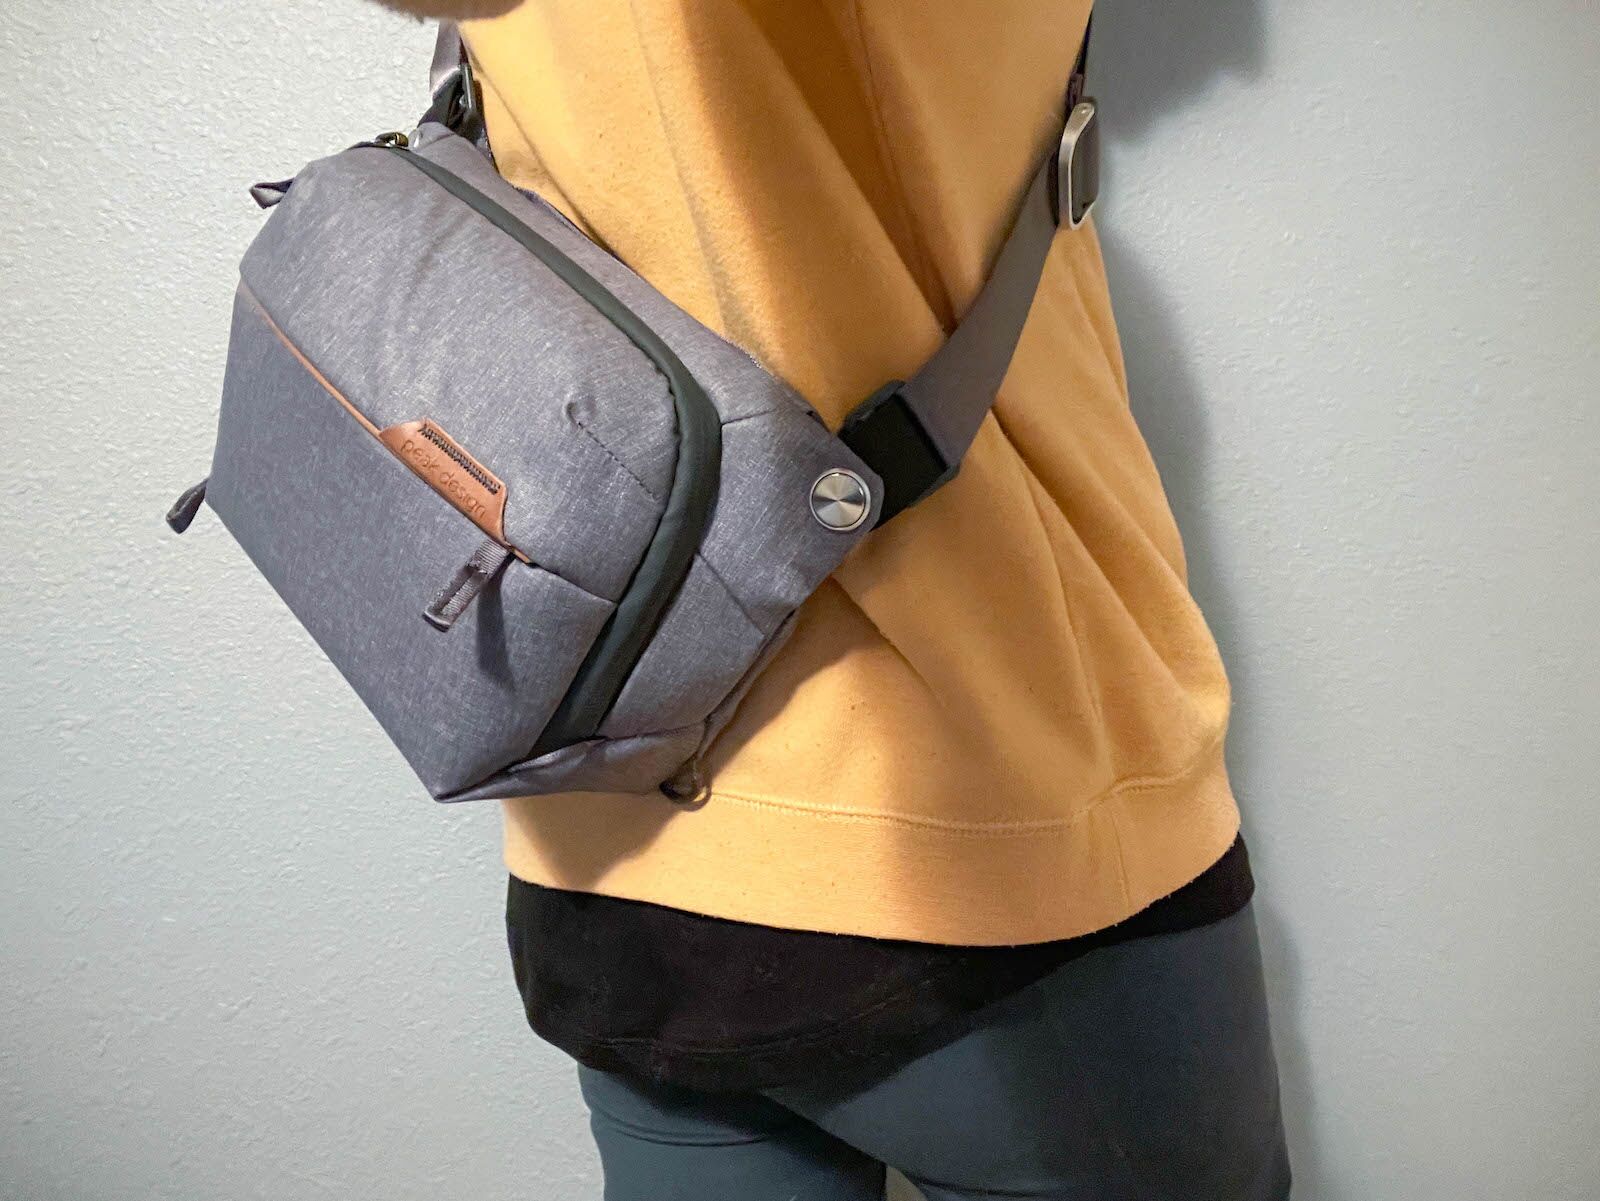 Everyday Sling from Peak Design on person's back